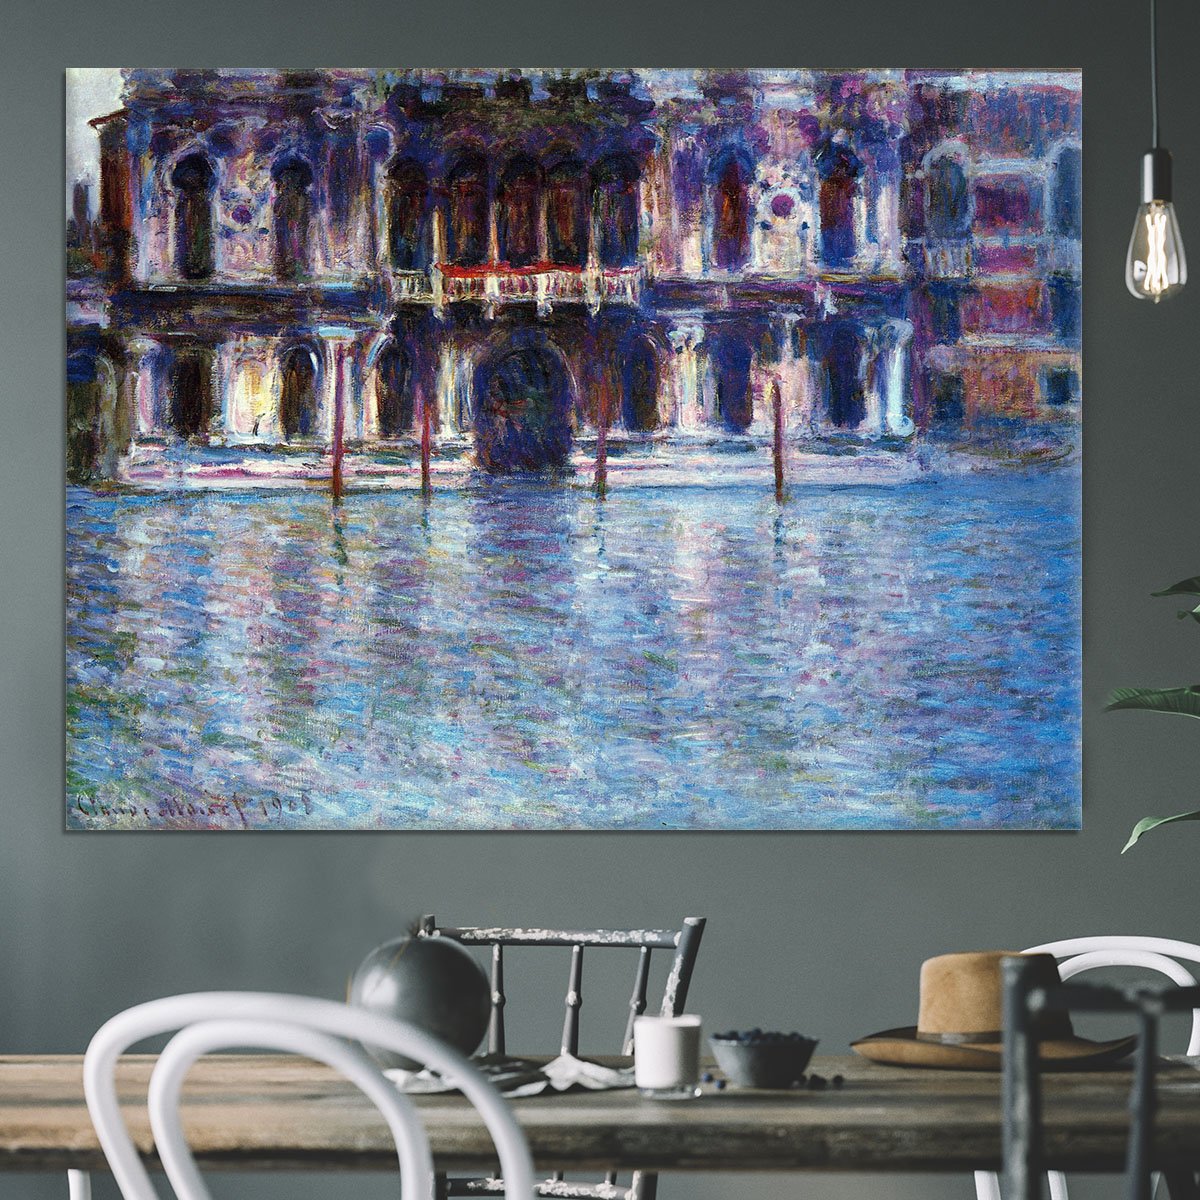 Palazzo 2 by Monet Canvas Print or Poster